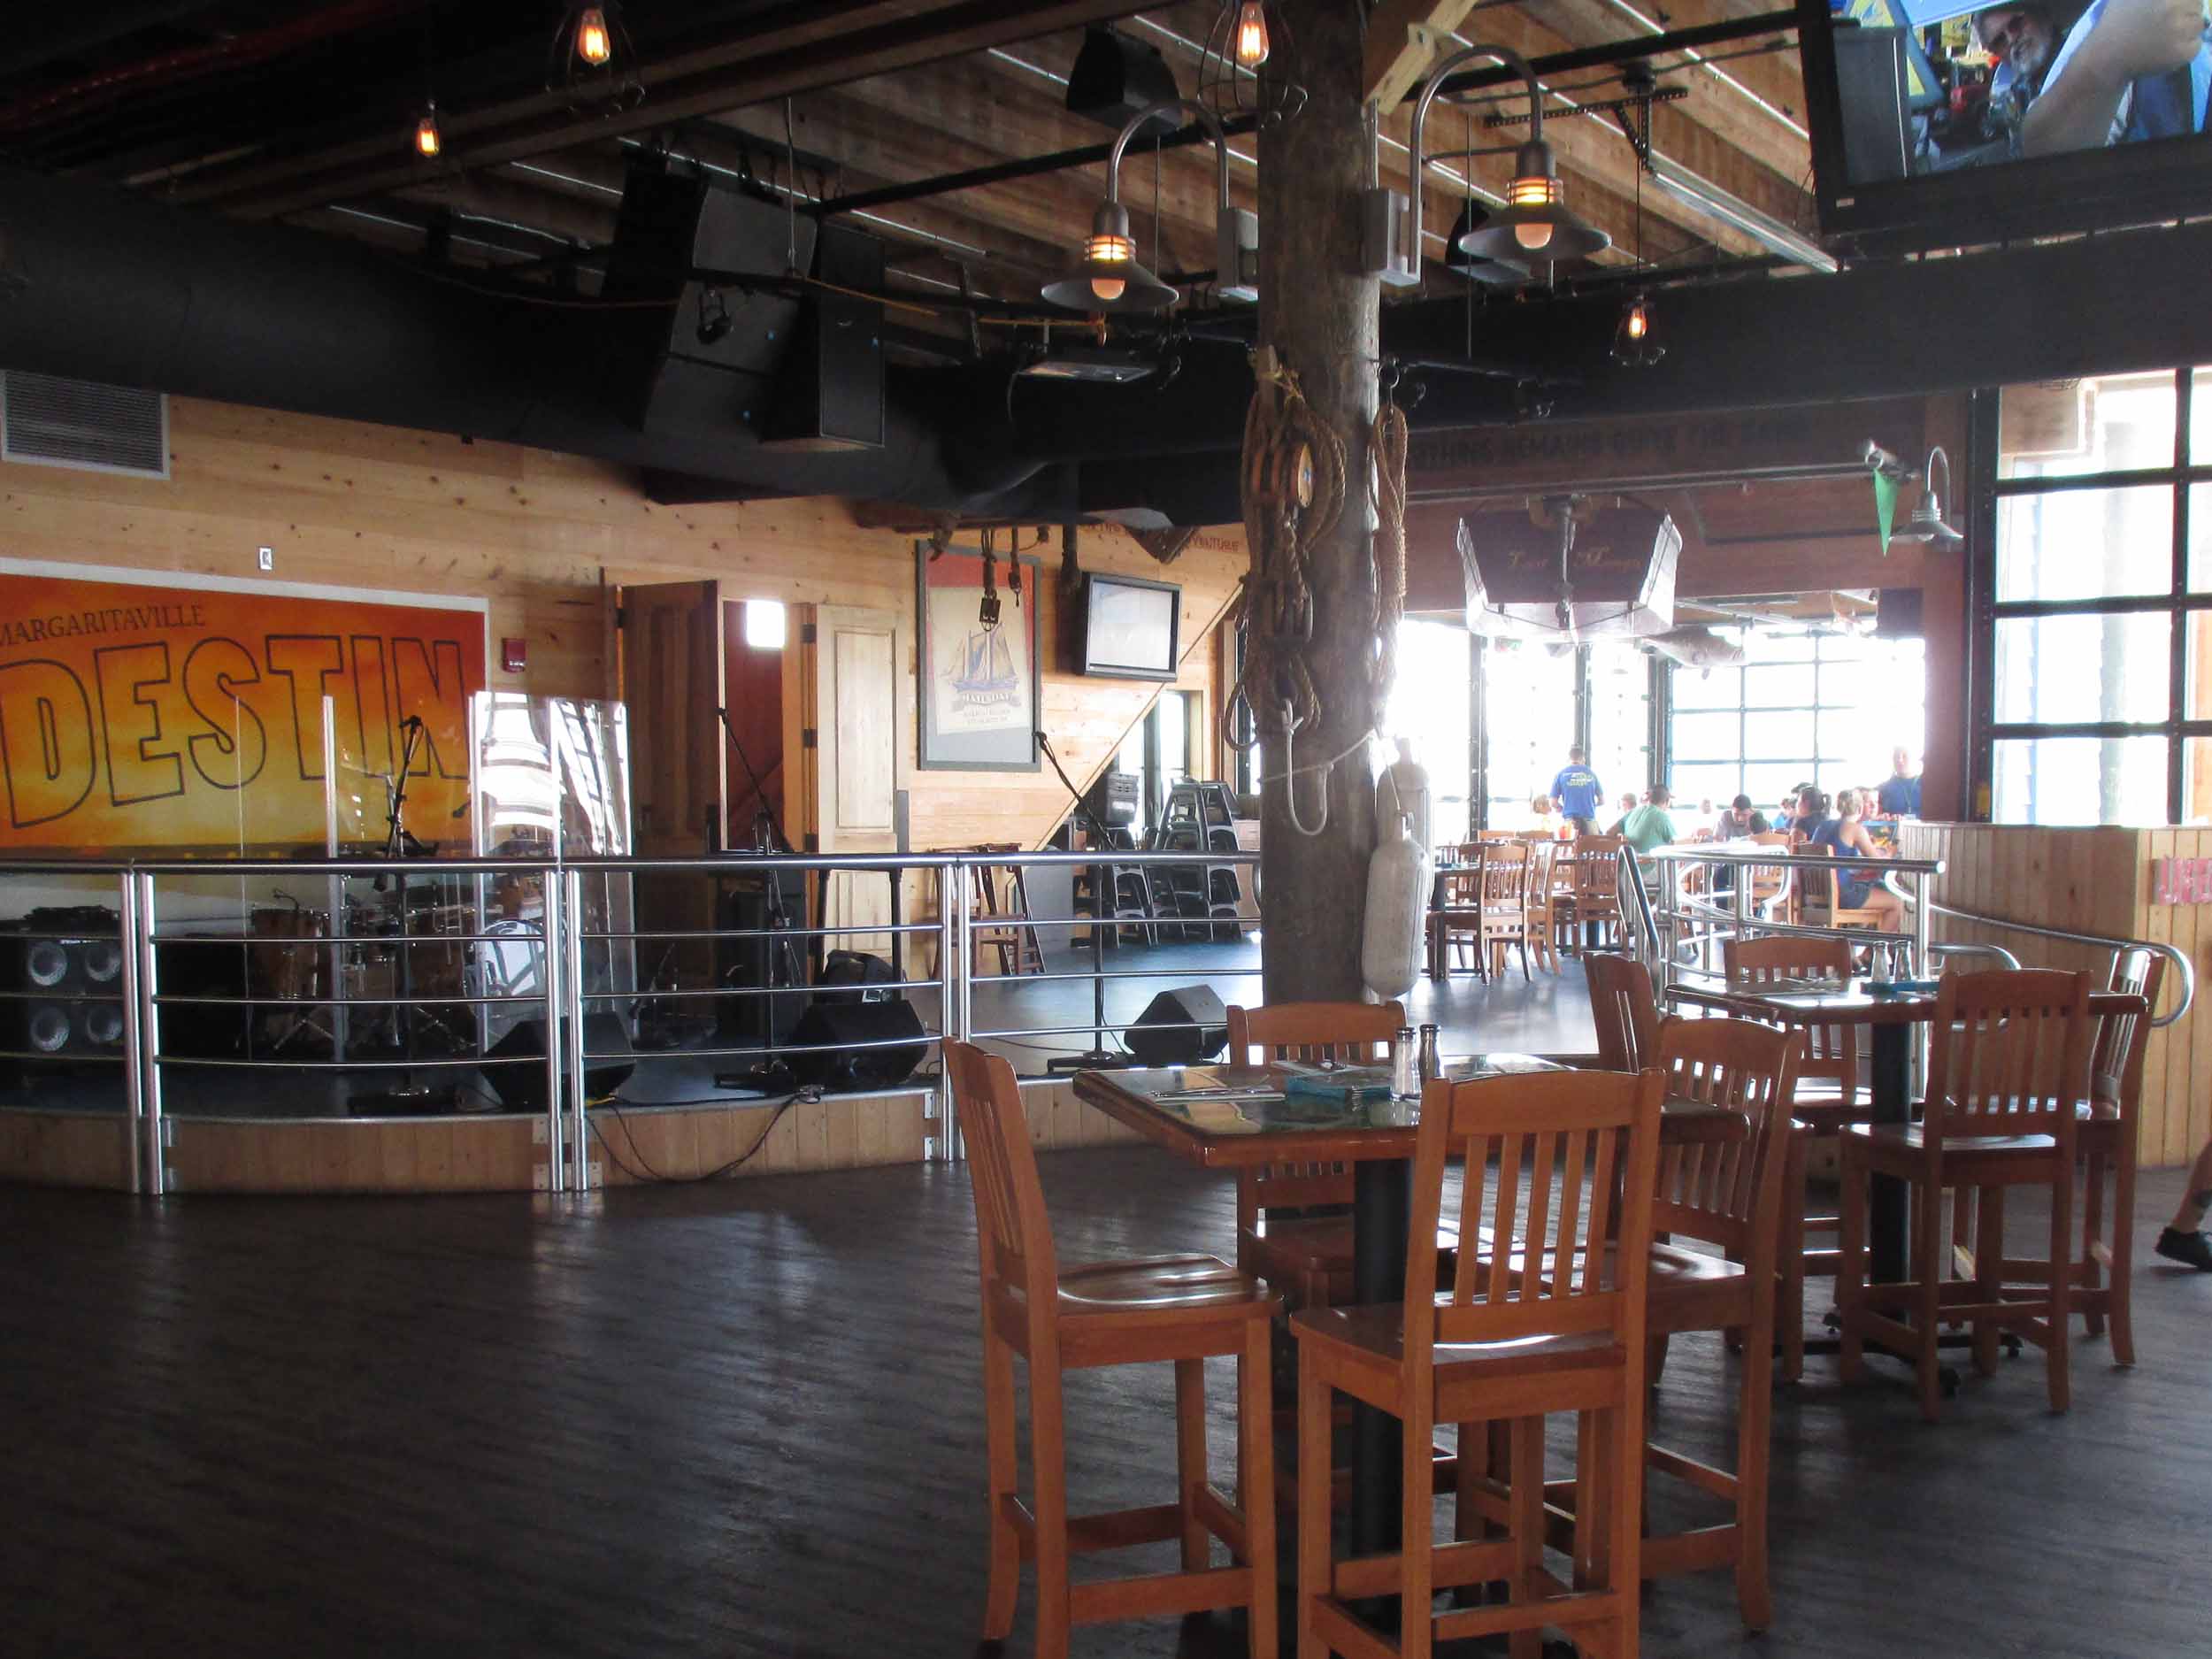 Jimmy Buffett's Margaritaville Interior Seating Area and Stage